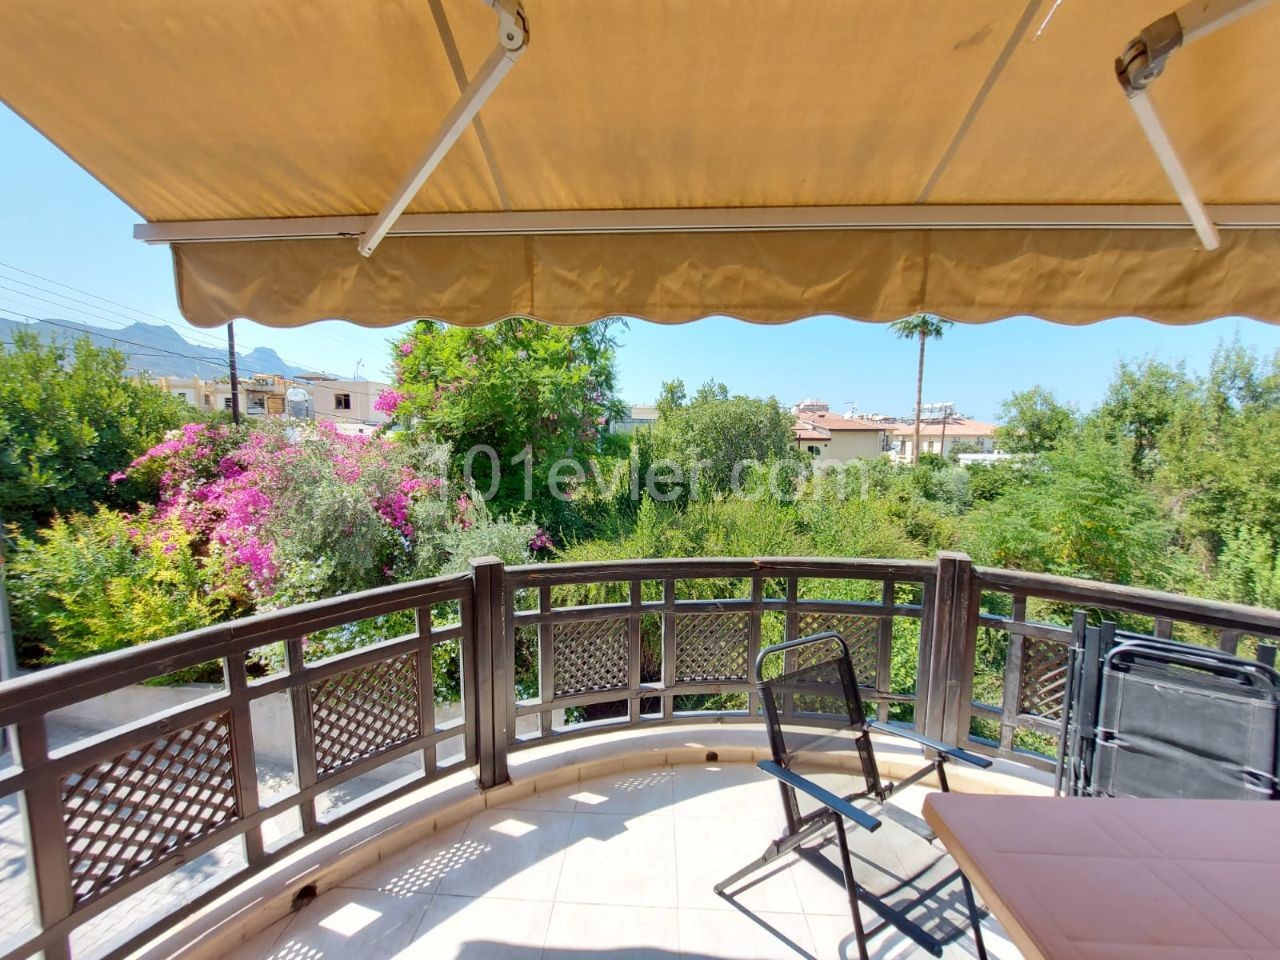 FOR SALE in Dogankoy on a site with a communal pool 3+1 / 130 apartment of m2.. ** 